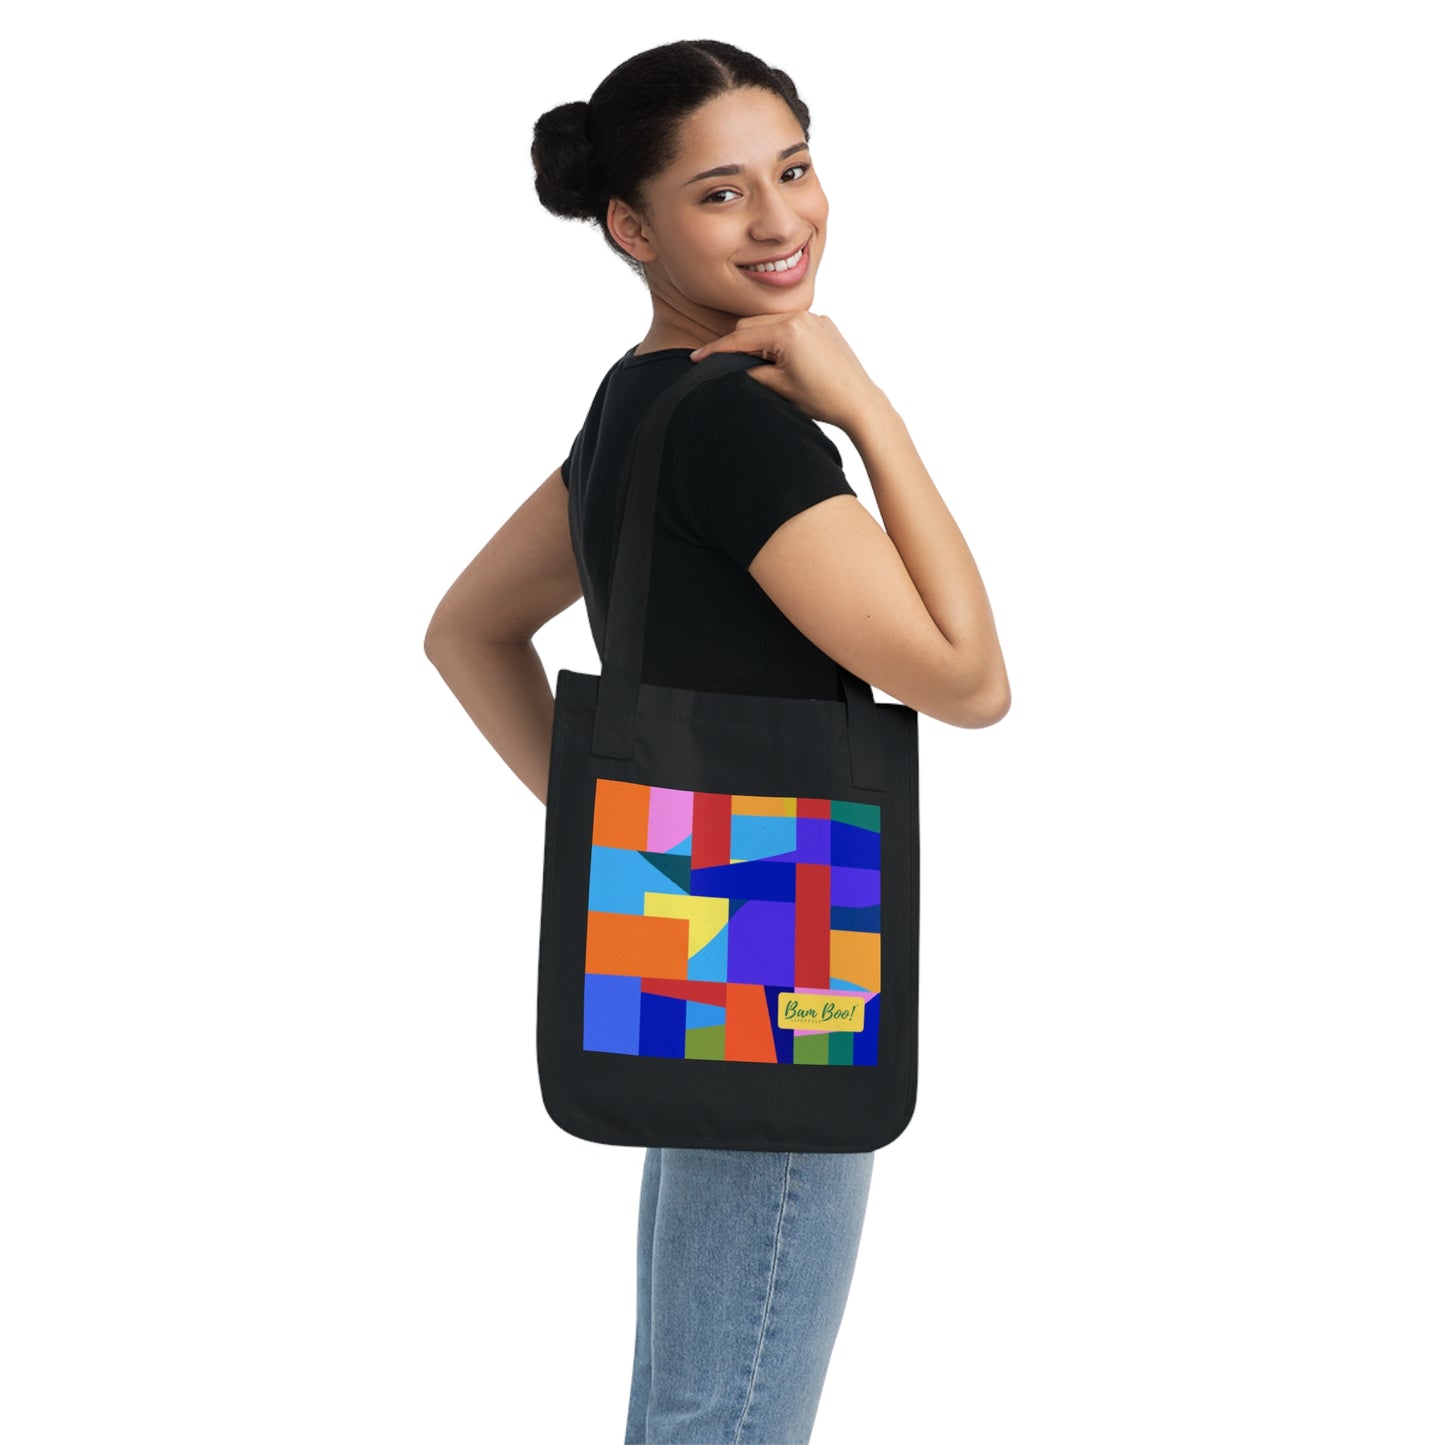 "Square Splendor: The Energy and Beauty of Nature" - Bam Boo! Lifestyle Eco-friendly Tote Bag